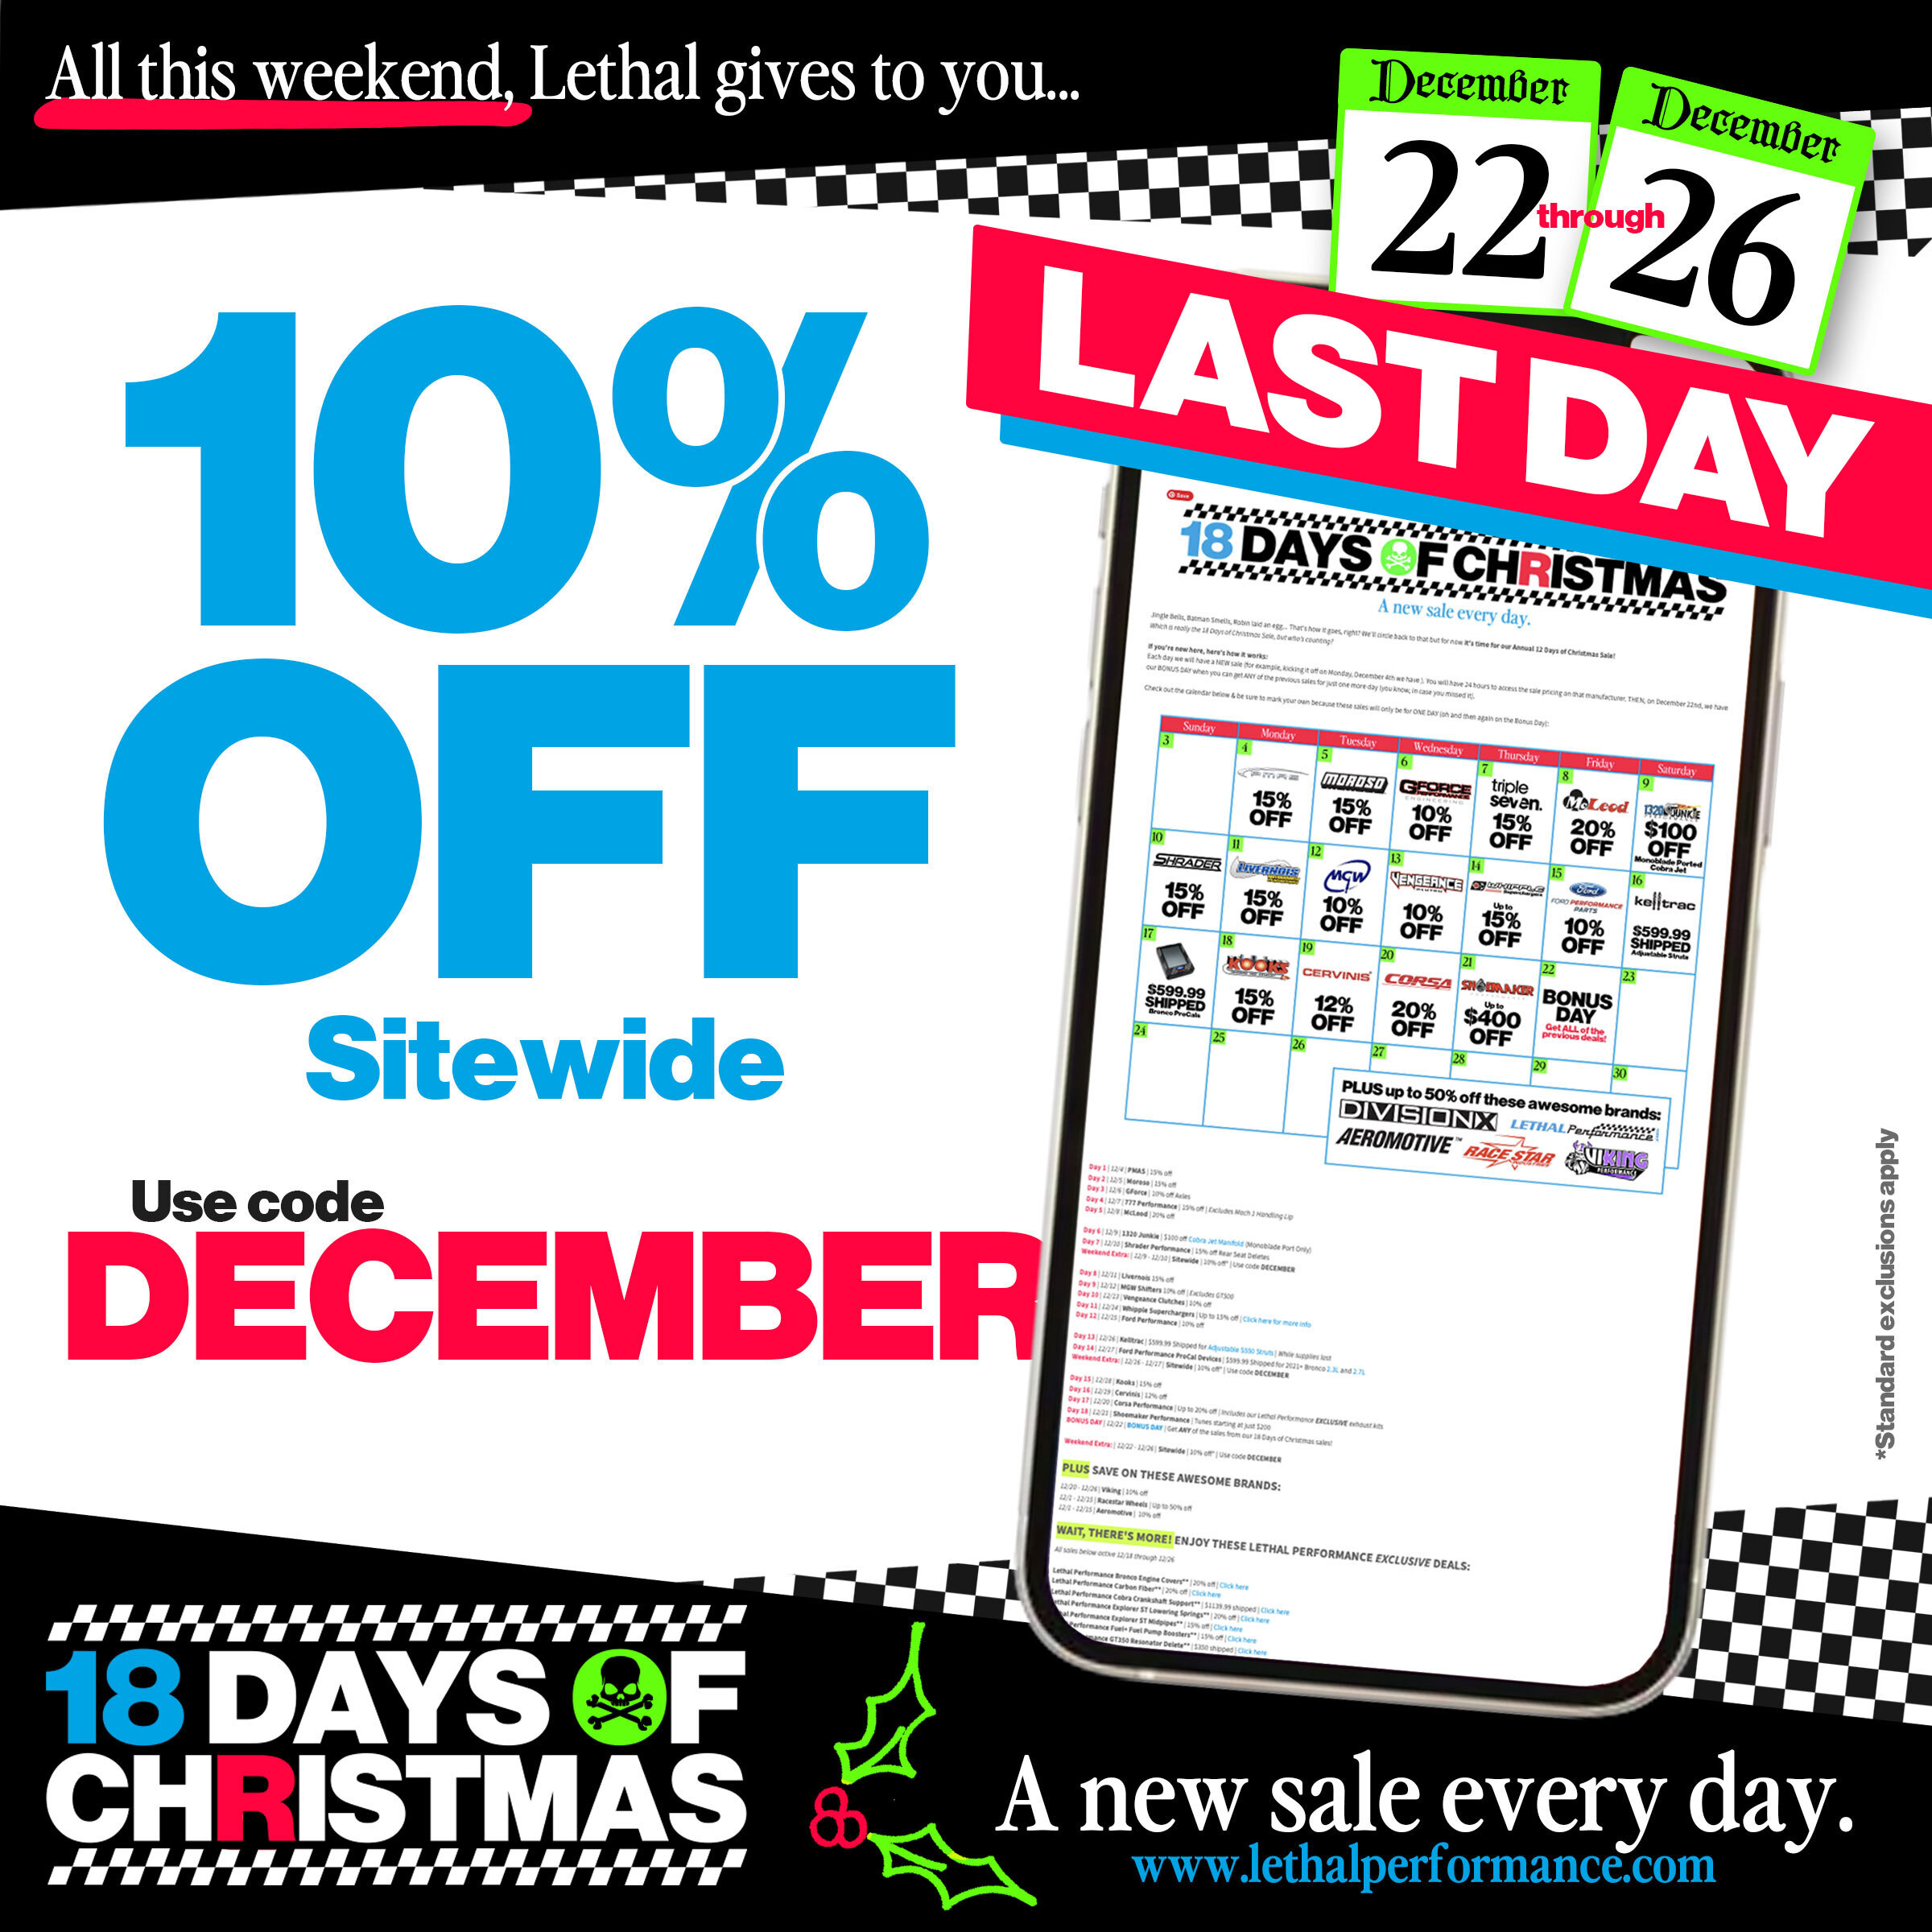 S650 Mustang Lethal Perfomance's 18 Days of Christmas SALES START NOW!! Sitewide_BonusWeekend